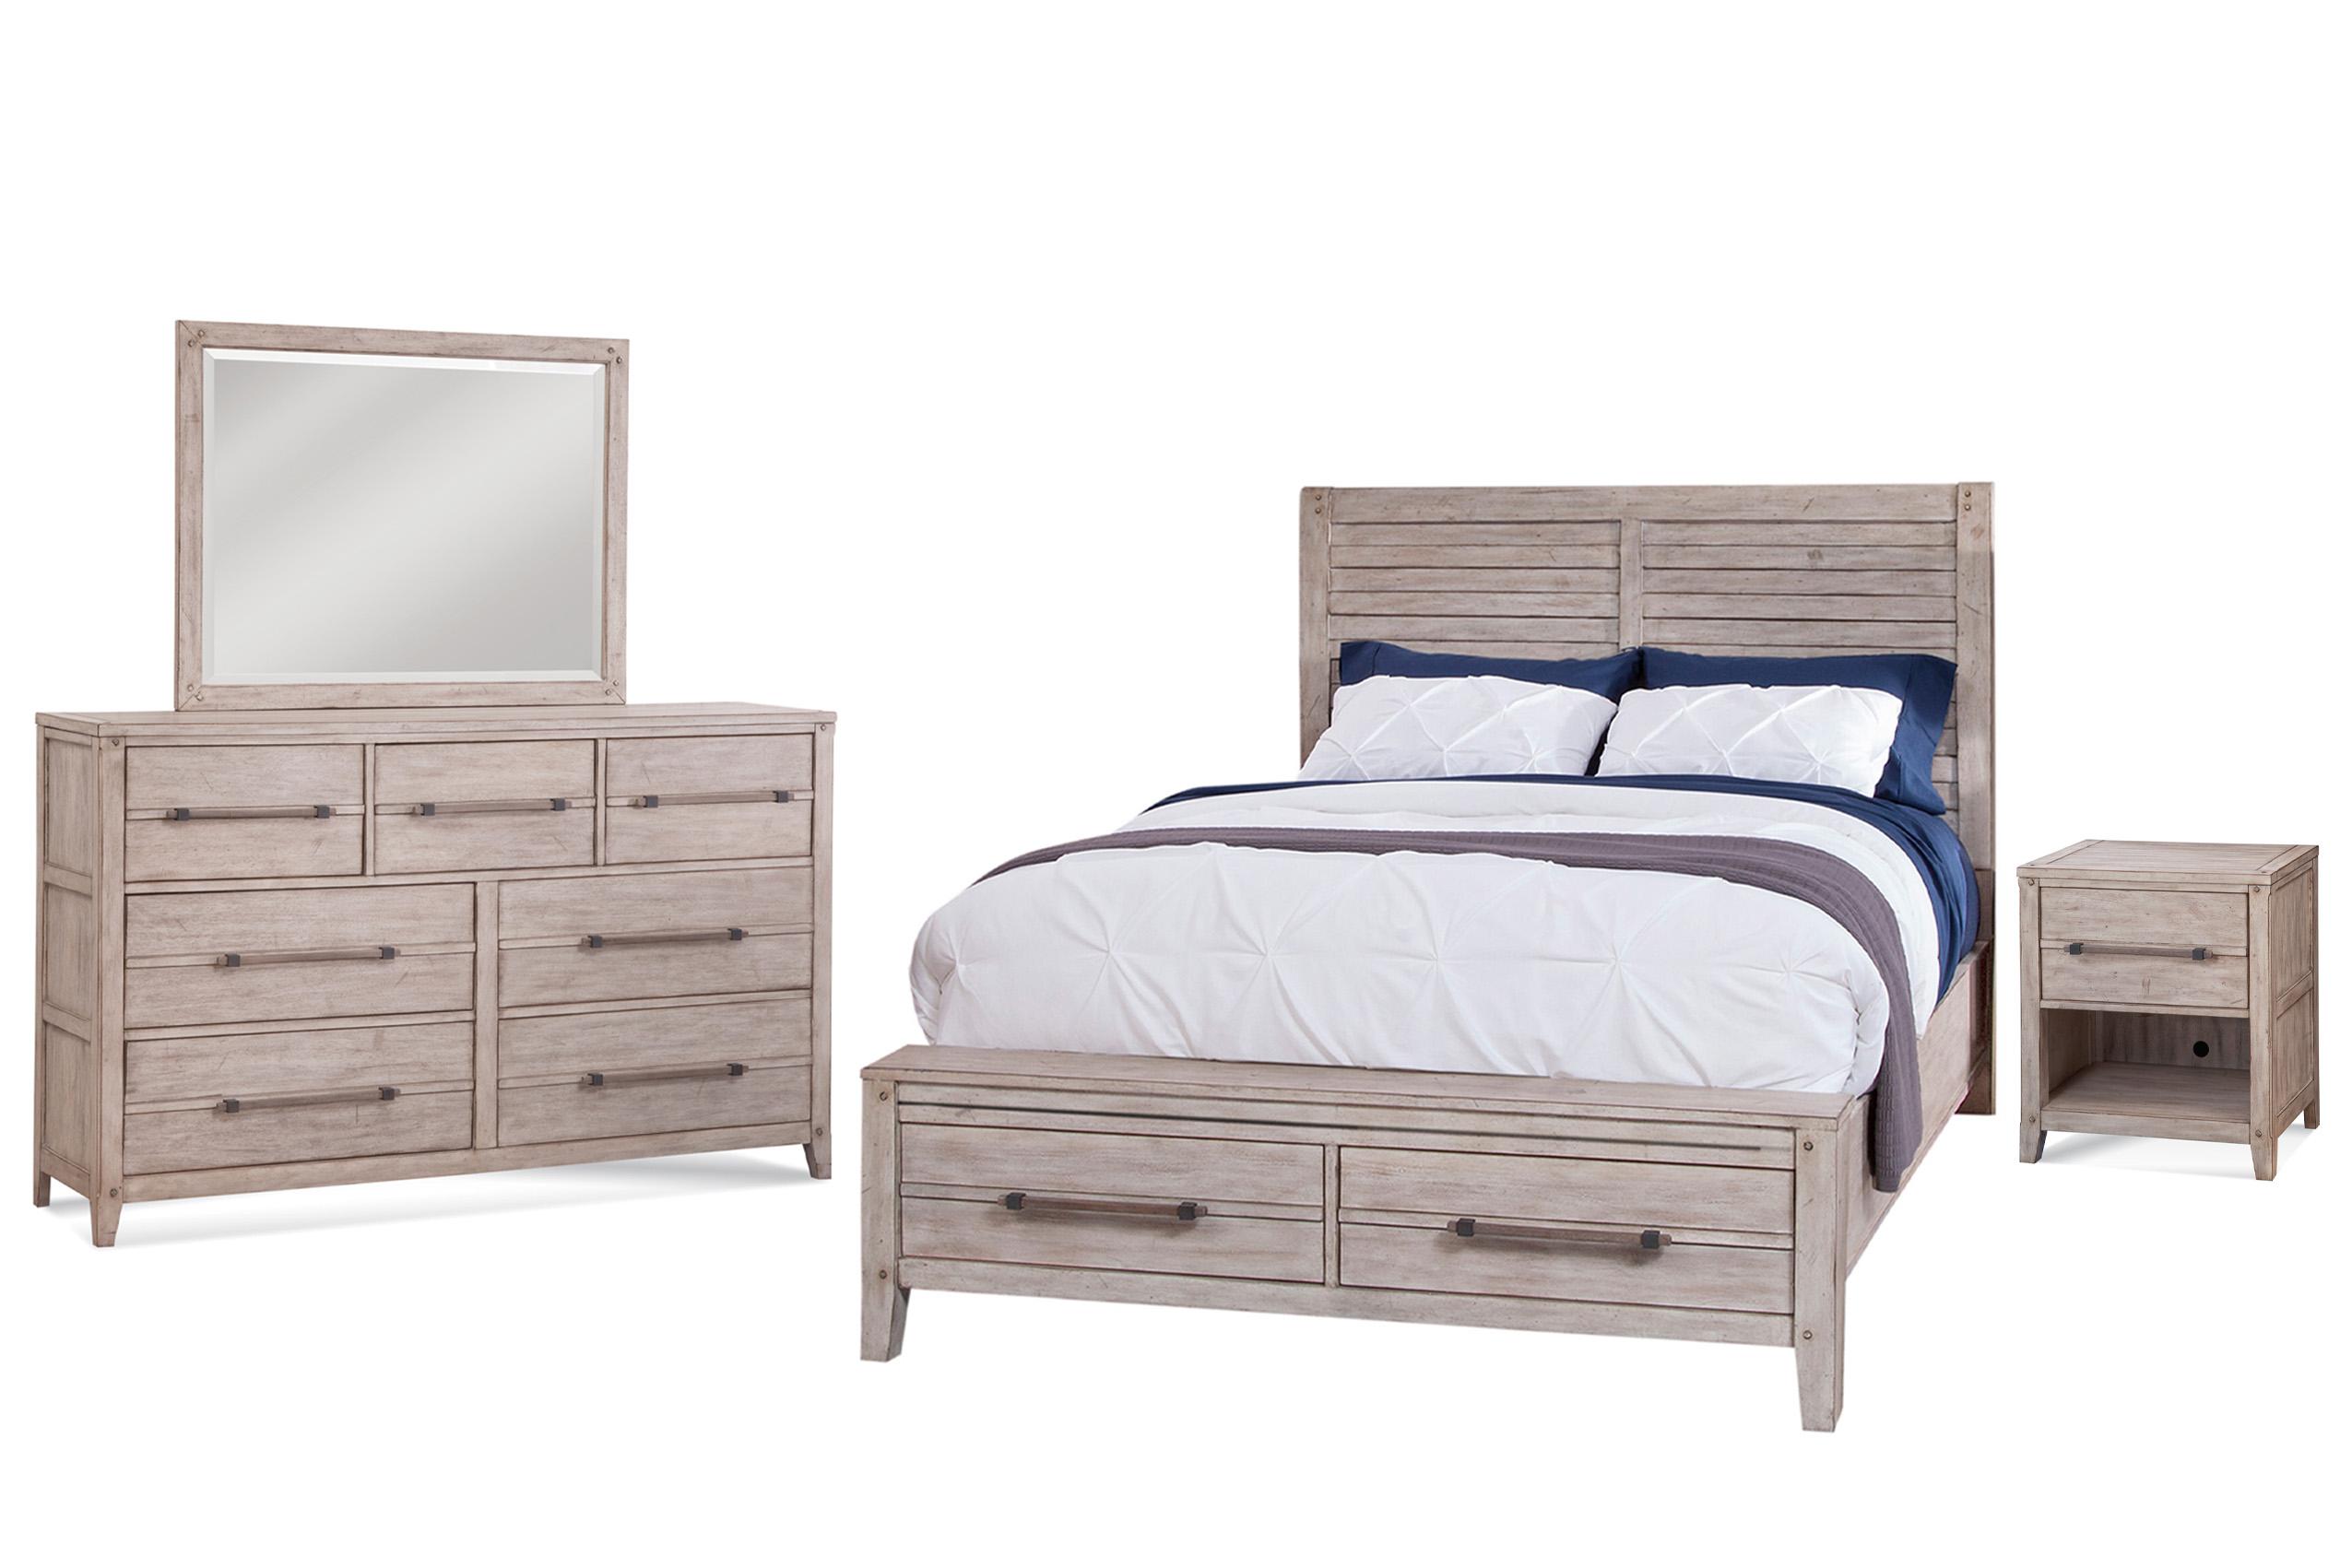 Classic, Traditional Panel Bedroom Set AURORA 2810-50PSB 2810-QPNST-4PC in whitewash 